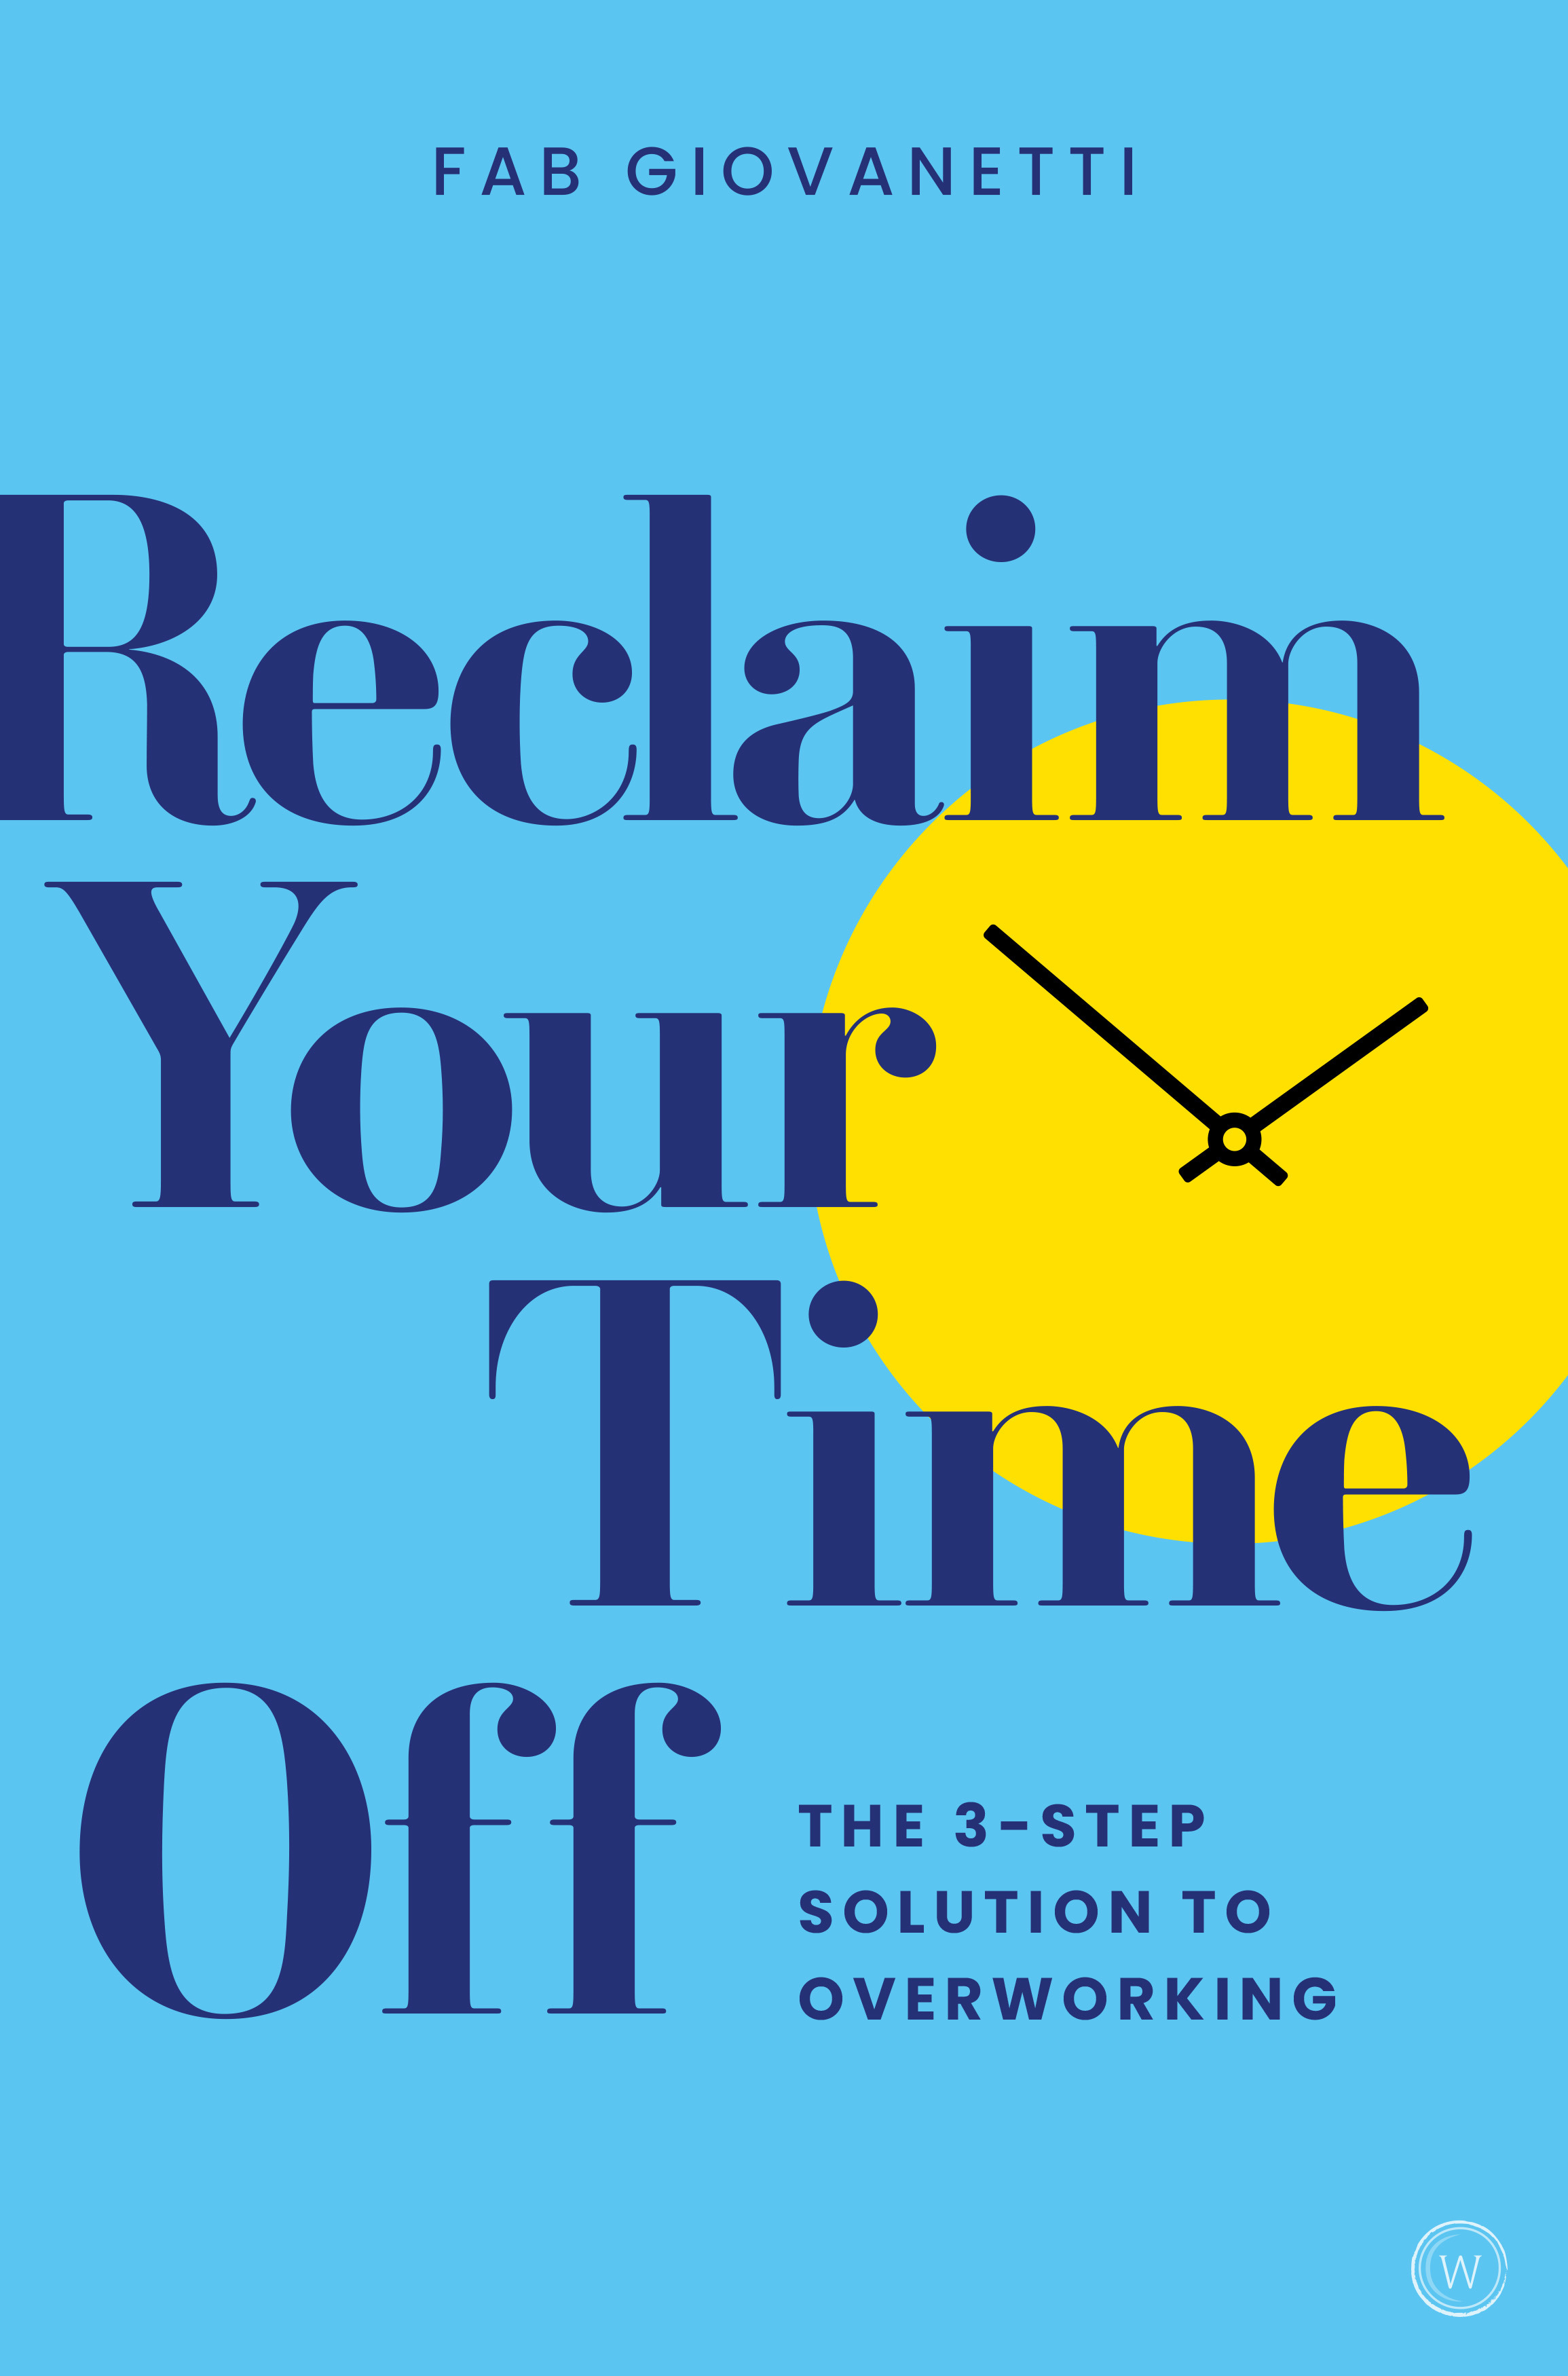 Reclaim Your Time Off : The 3-step Solution to Overworking | Giovanetti, Fab